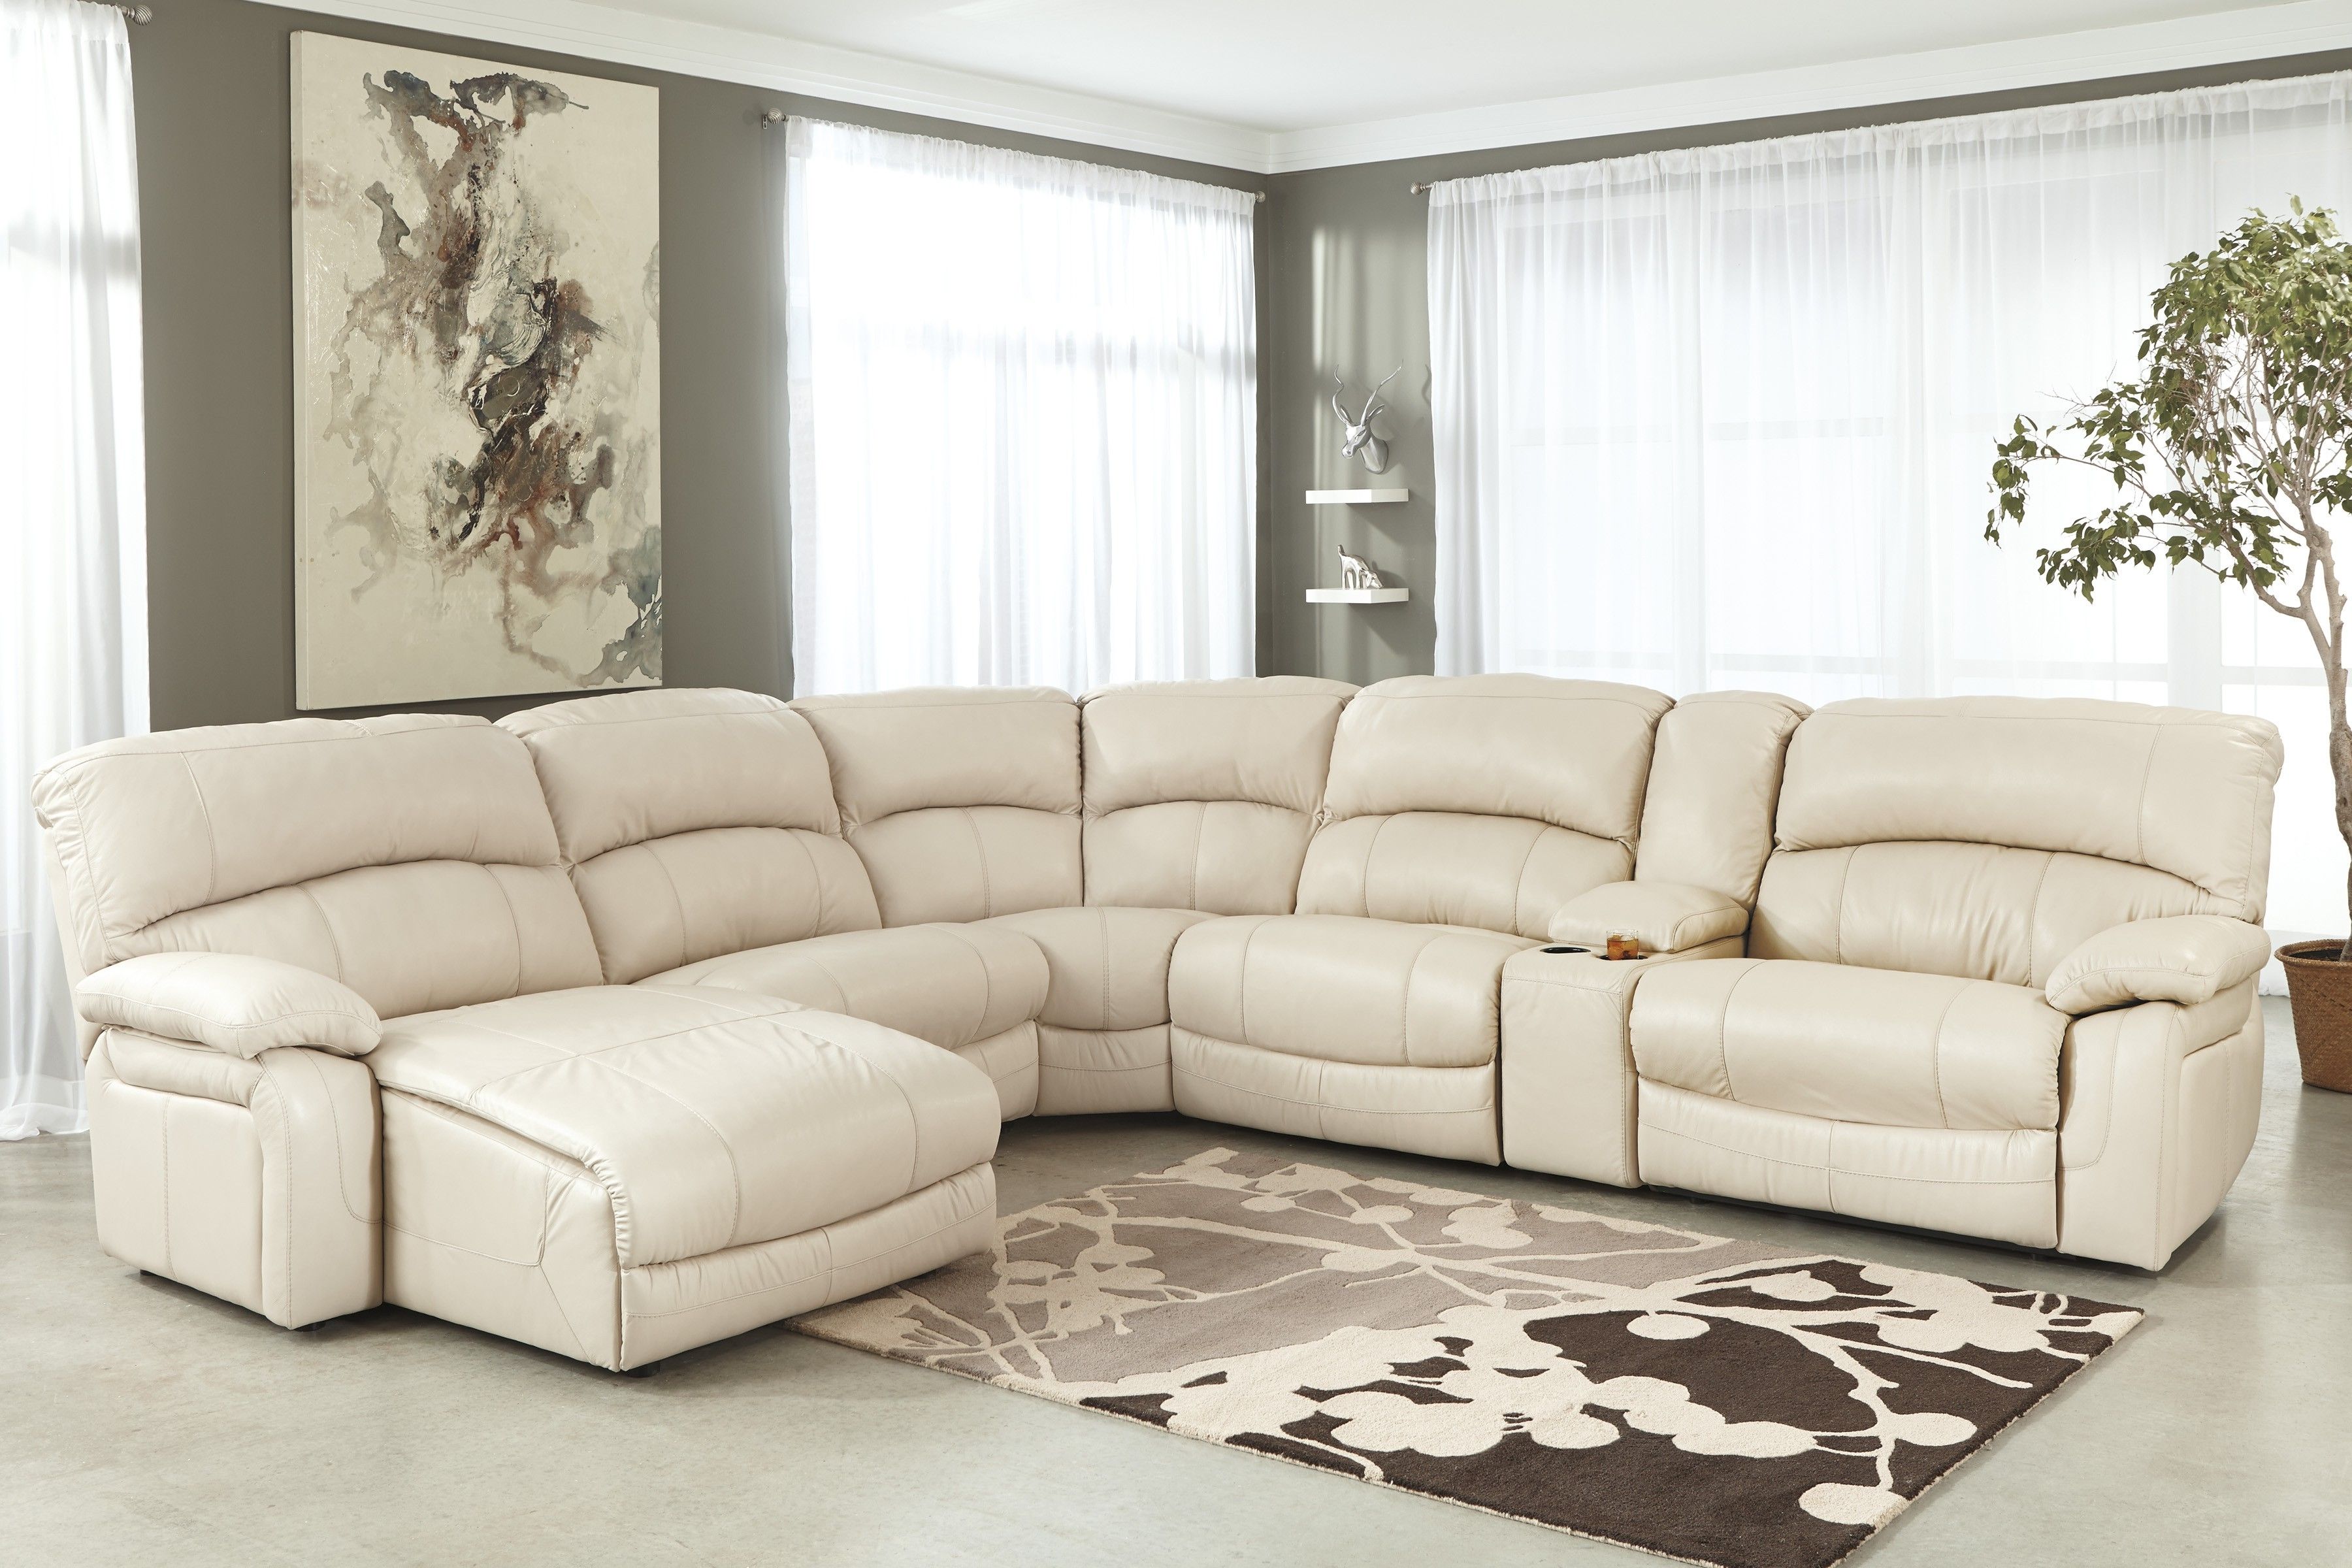 Emejing Off White Leather Furniture Pictures – Liltigertoo Inside Most Recent Off White Leather Sofas (View 6 of 20)